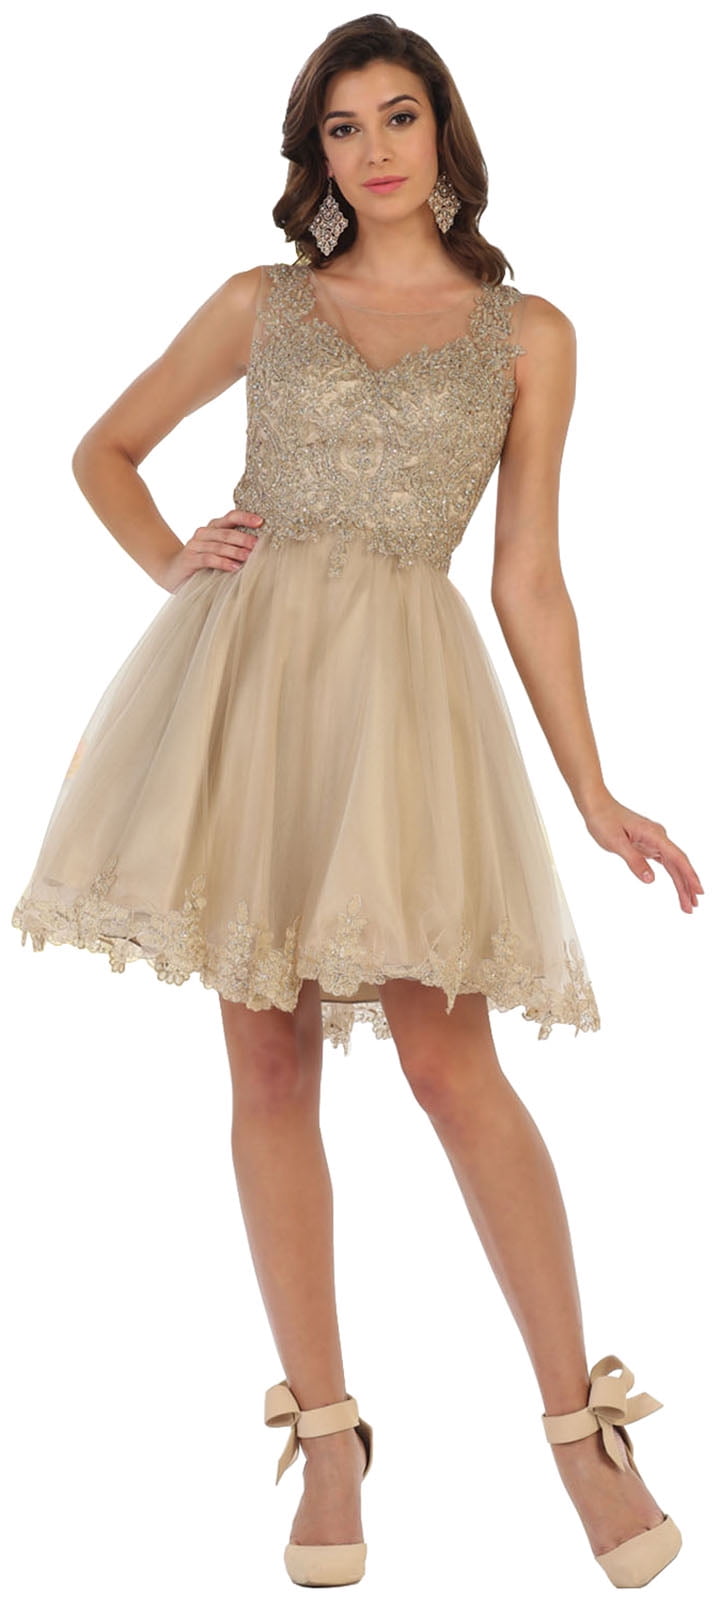 HOMECOMING ONE PIECE SEMI FORMAL DANCE PROM SHORT DEMURE SWEET 16 COCKTAIL DRESS 